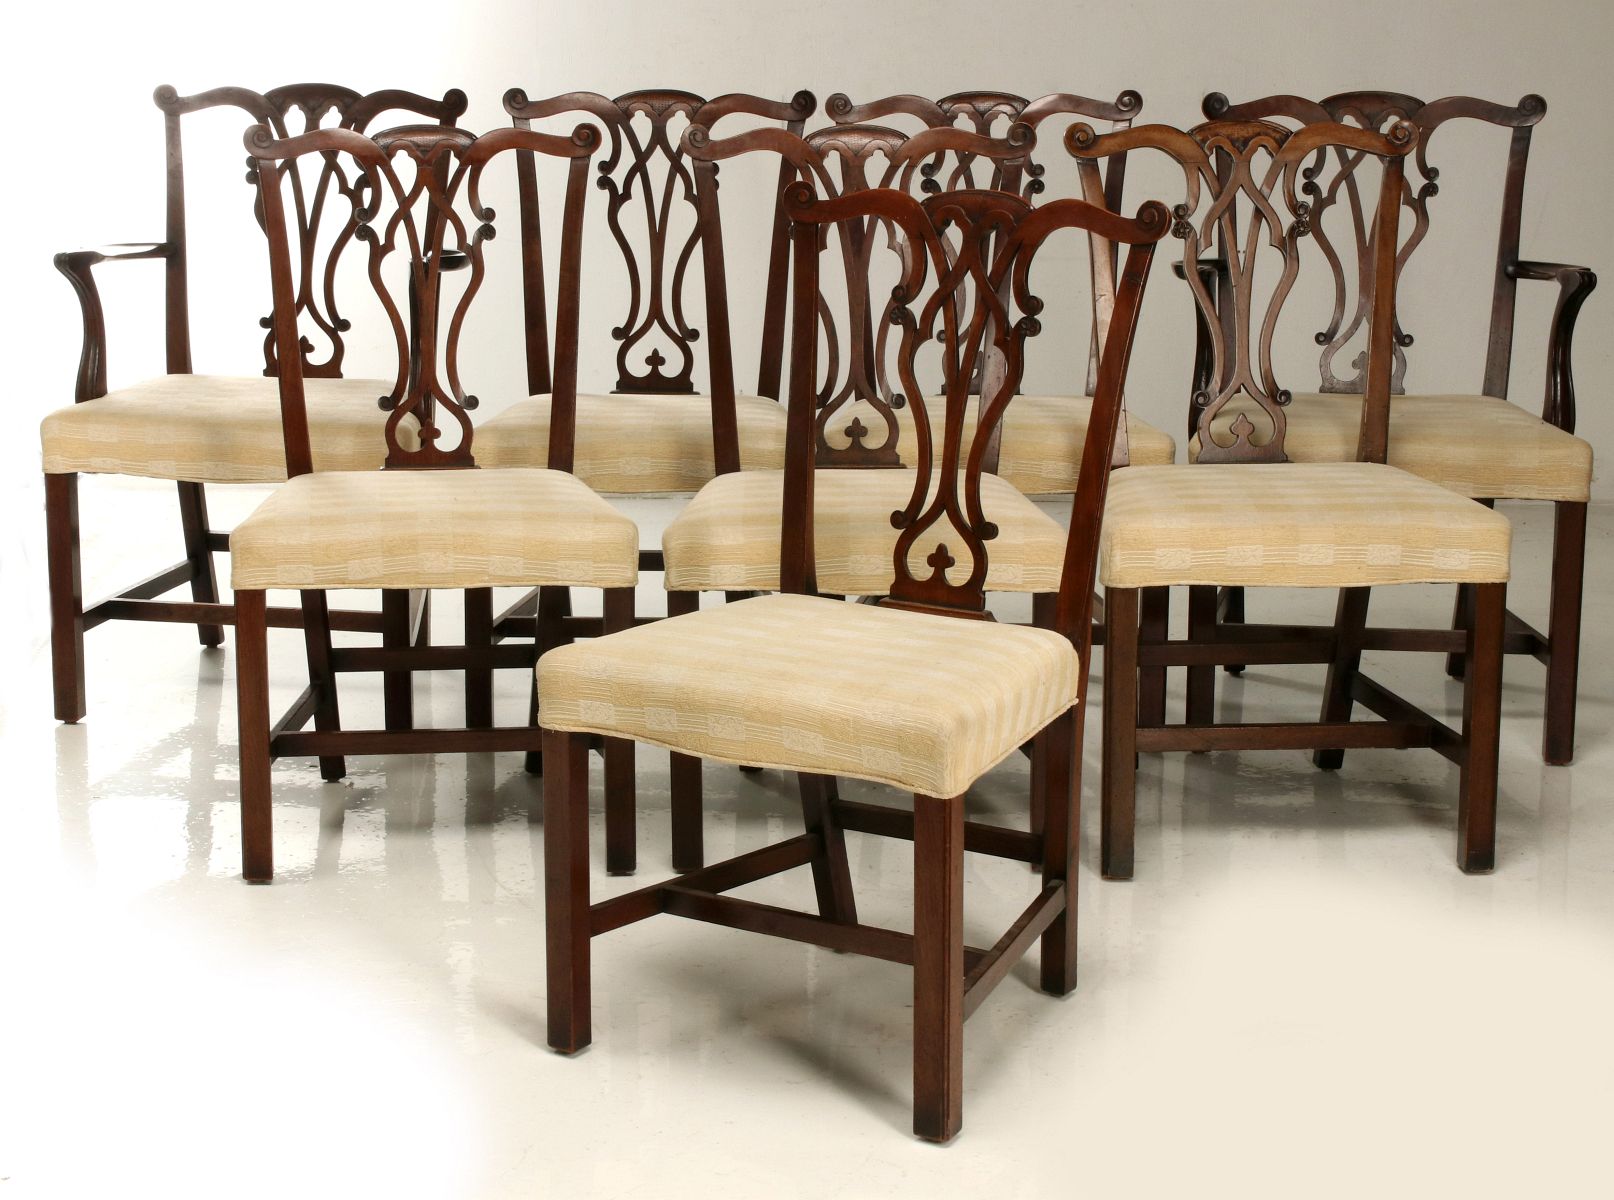 EIGHT FINE CARVED CHIPPENDALE STYLE DINING CHAIRS